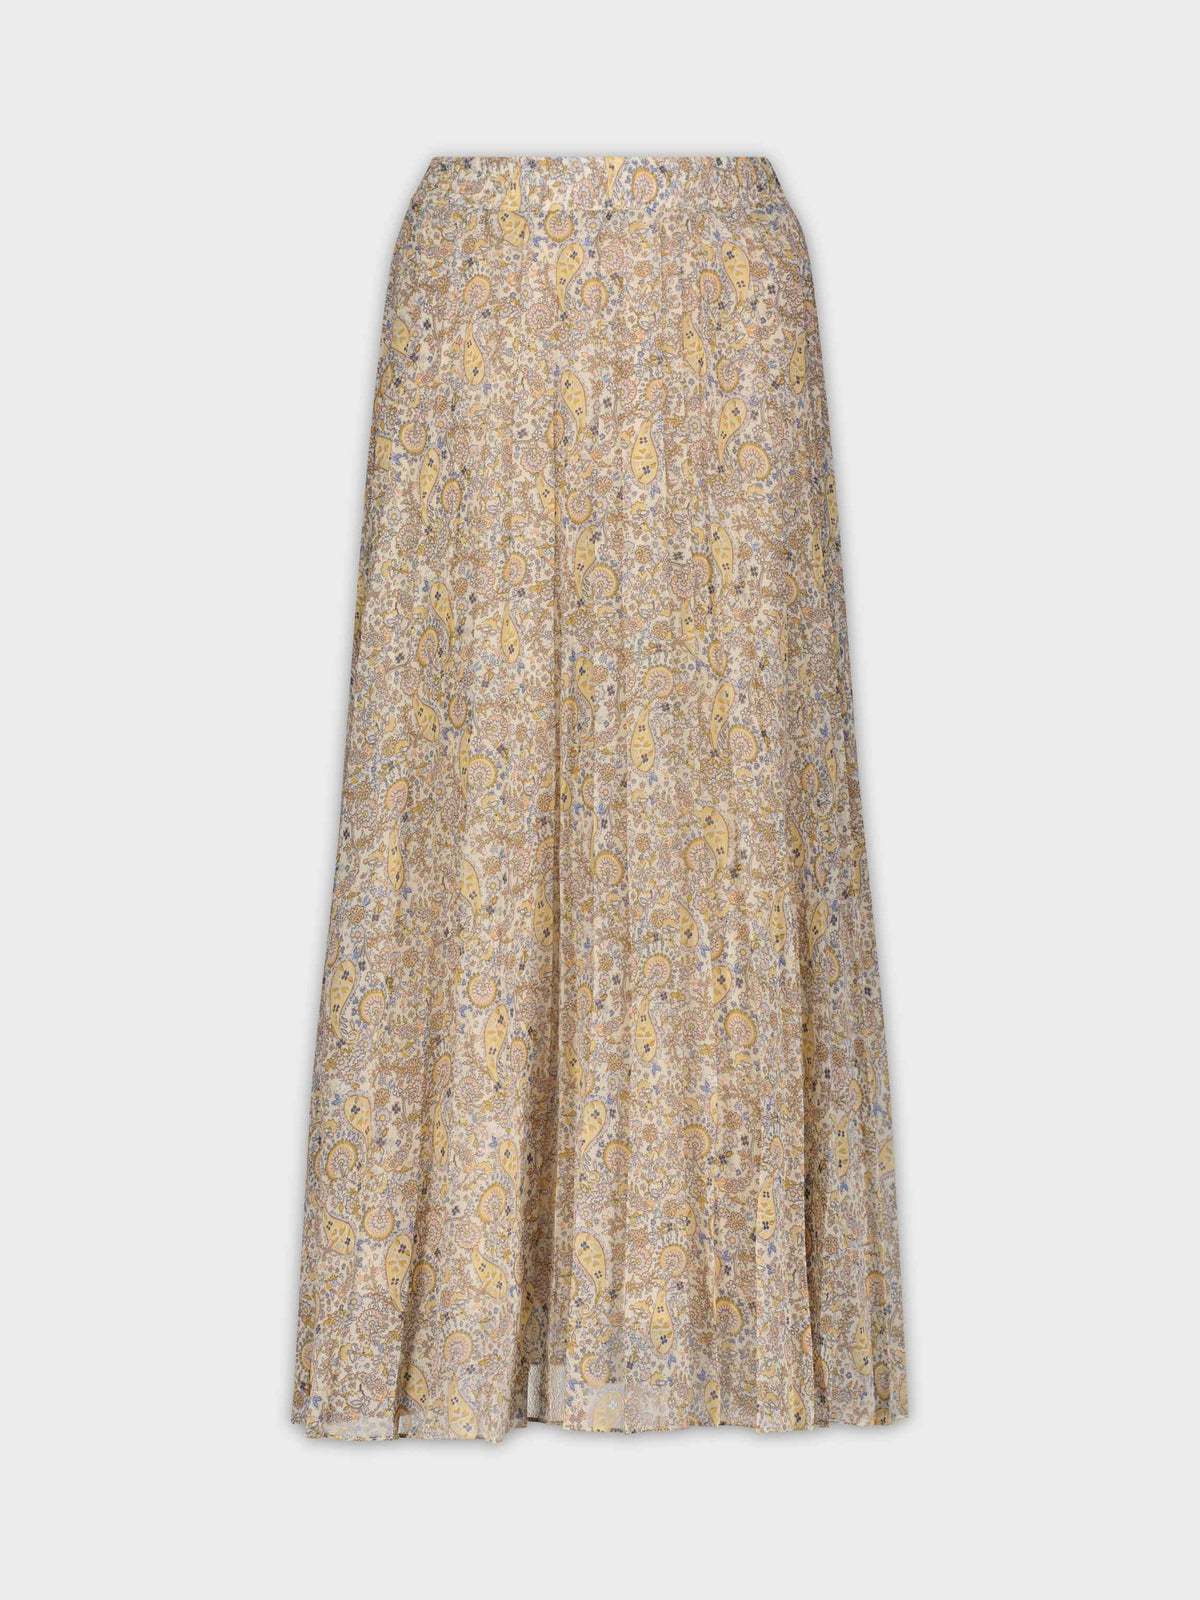 COVERED BAND PLEATED SKIRT 37"-TAN PAISLEY